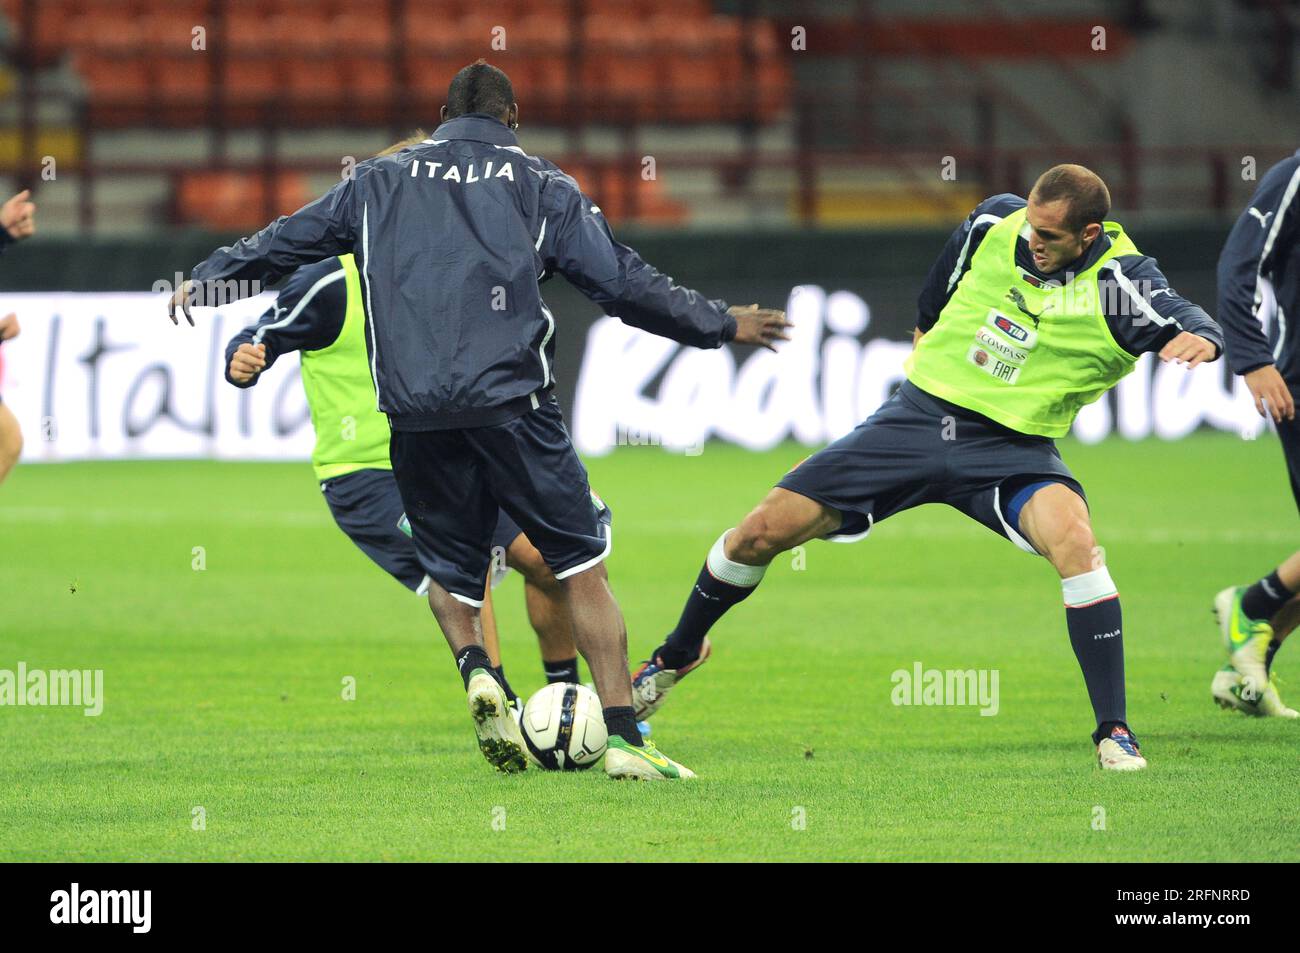 Milan Italy 2012-10-12 :Giorgio Chiellini during the training of the Italian national football team, at the San Siro stadium for the 2014 World Cup qualifiers Stock Photo